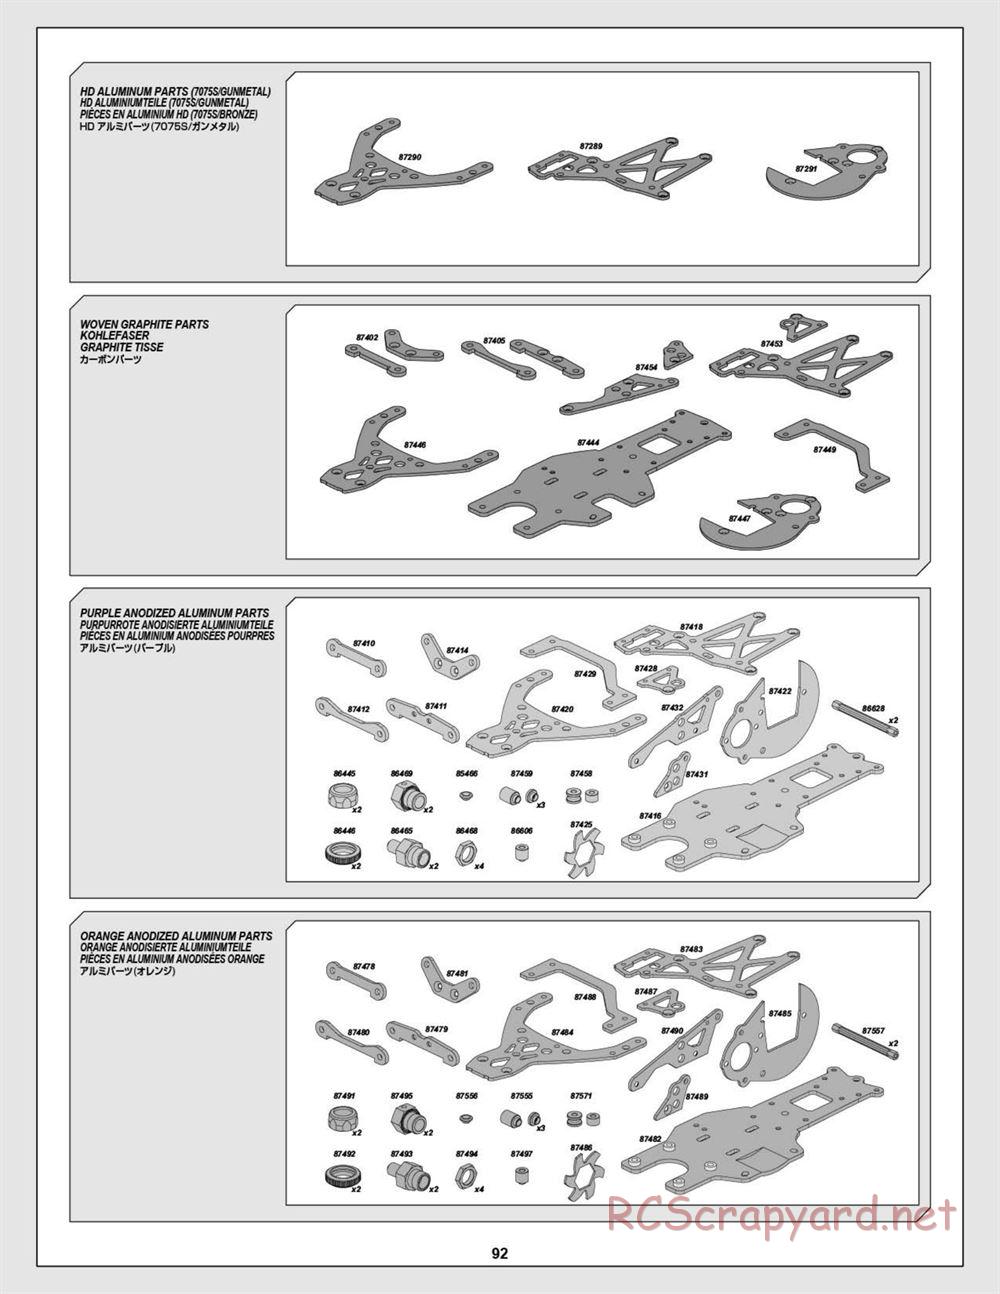 HPI - Baja 5B 2.0 RTR - Exploded View - Page 92